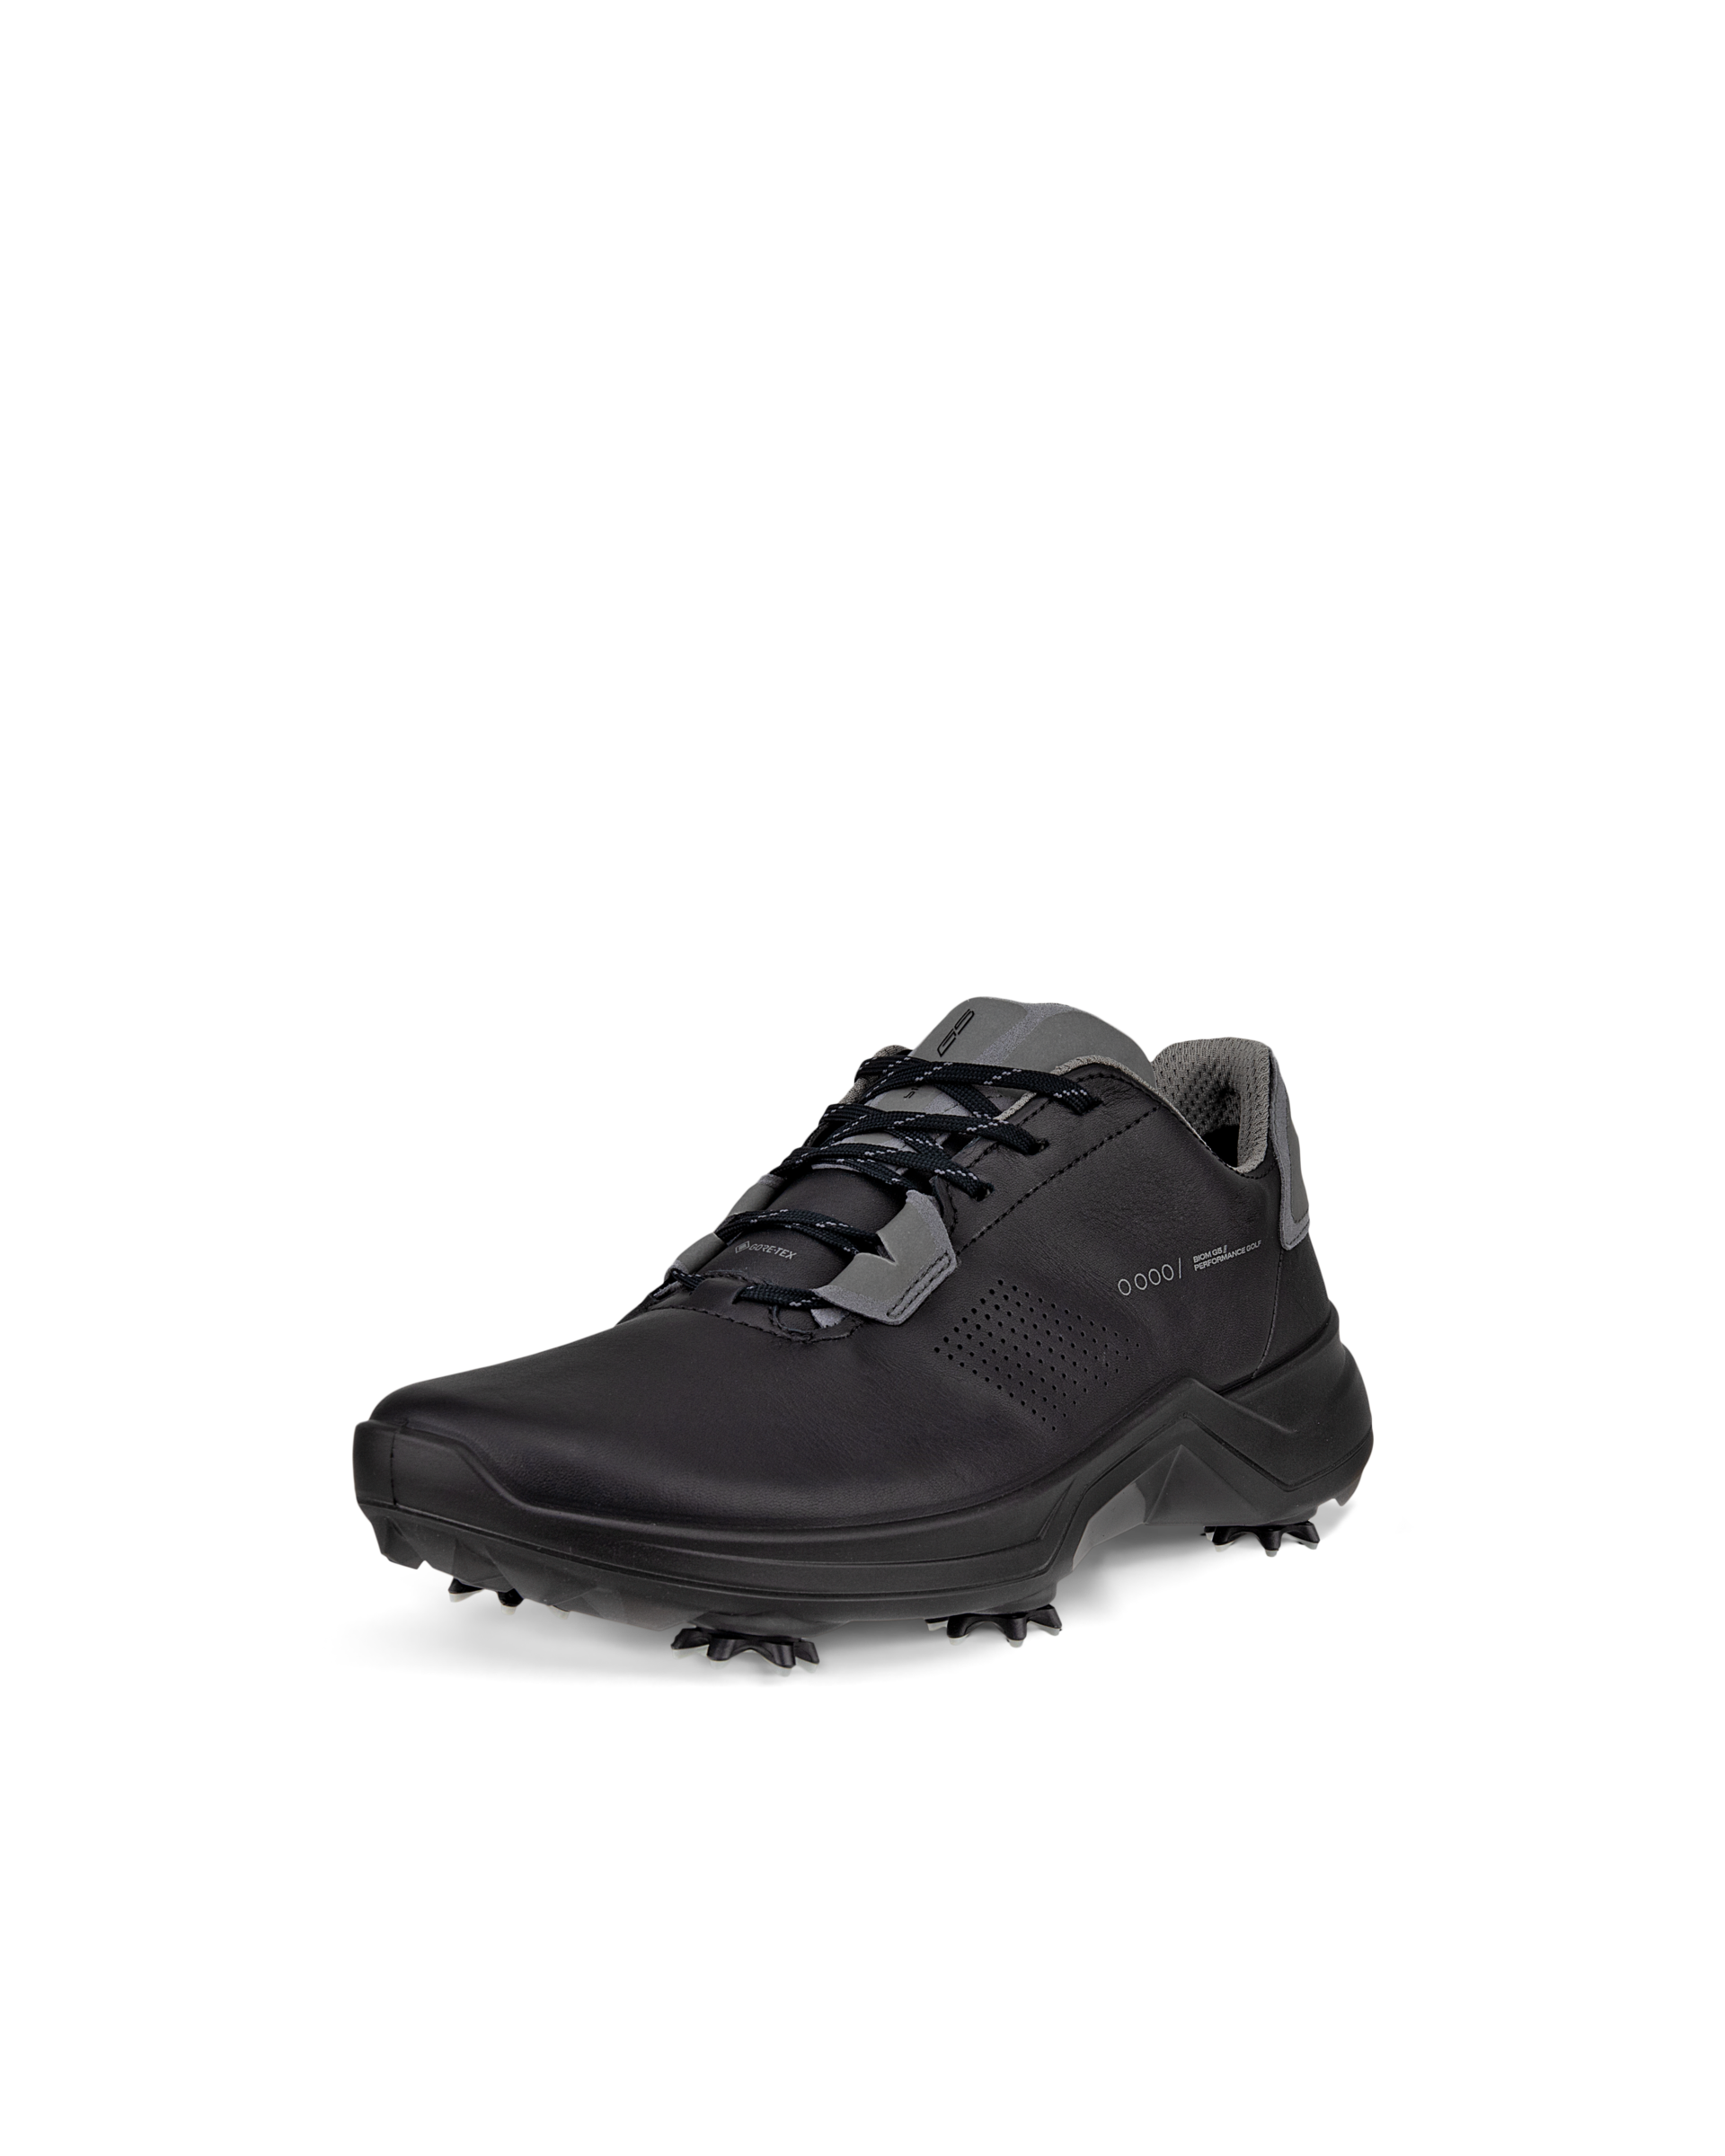 Waterproof Shoes - Shop for Gore-Tex® Shoes Now